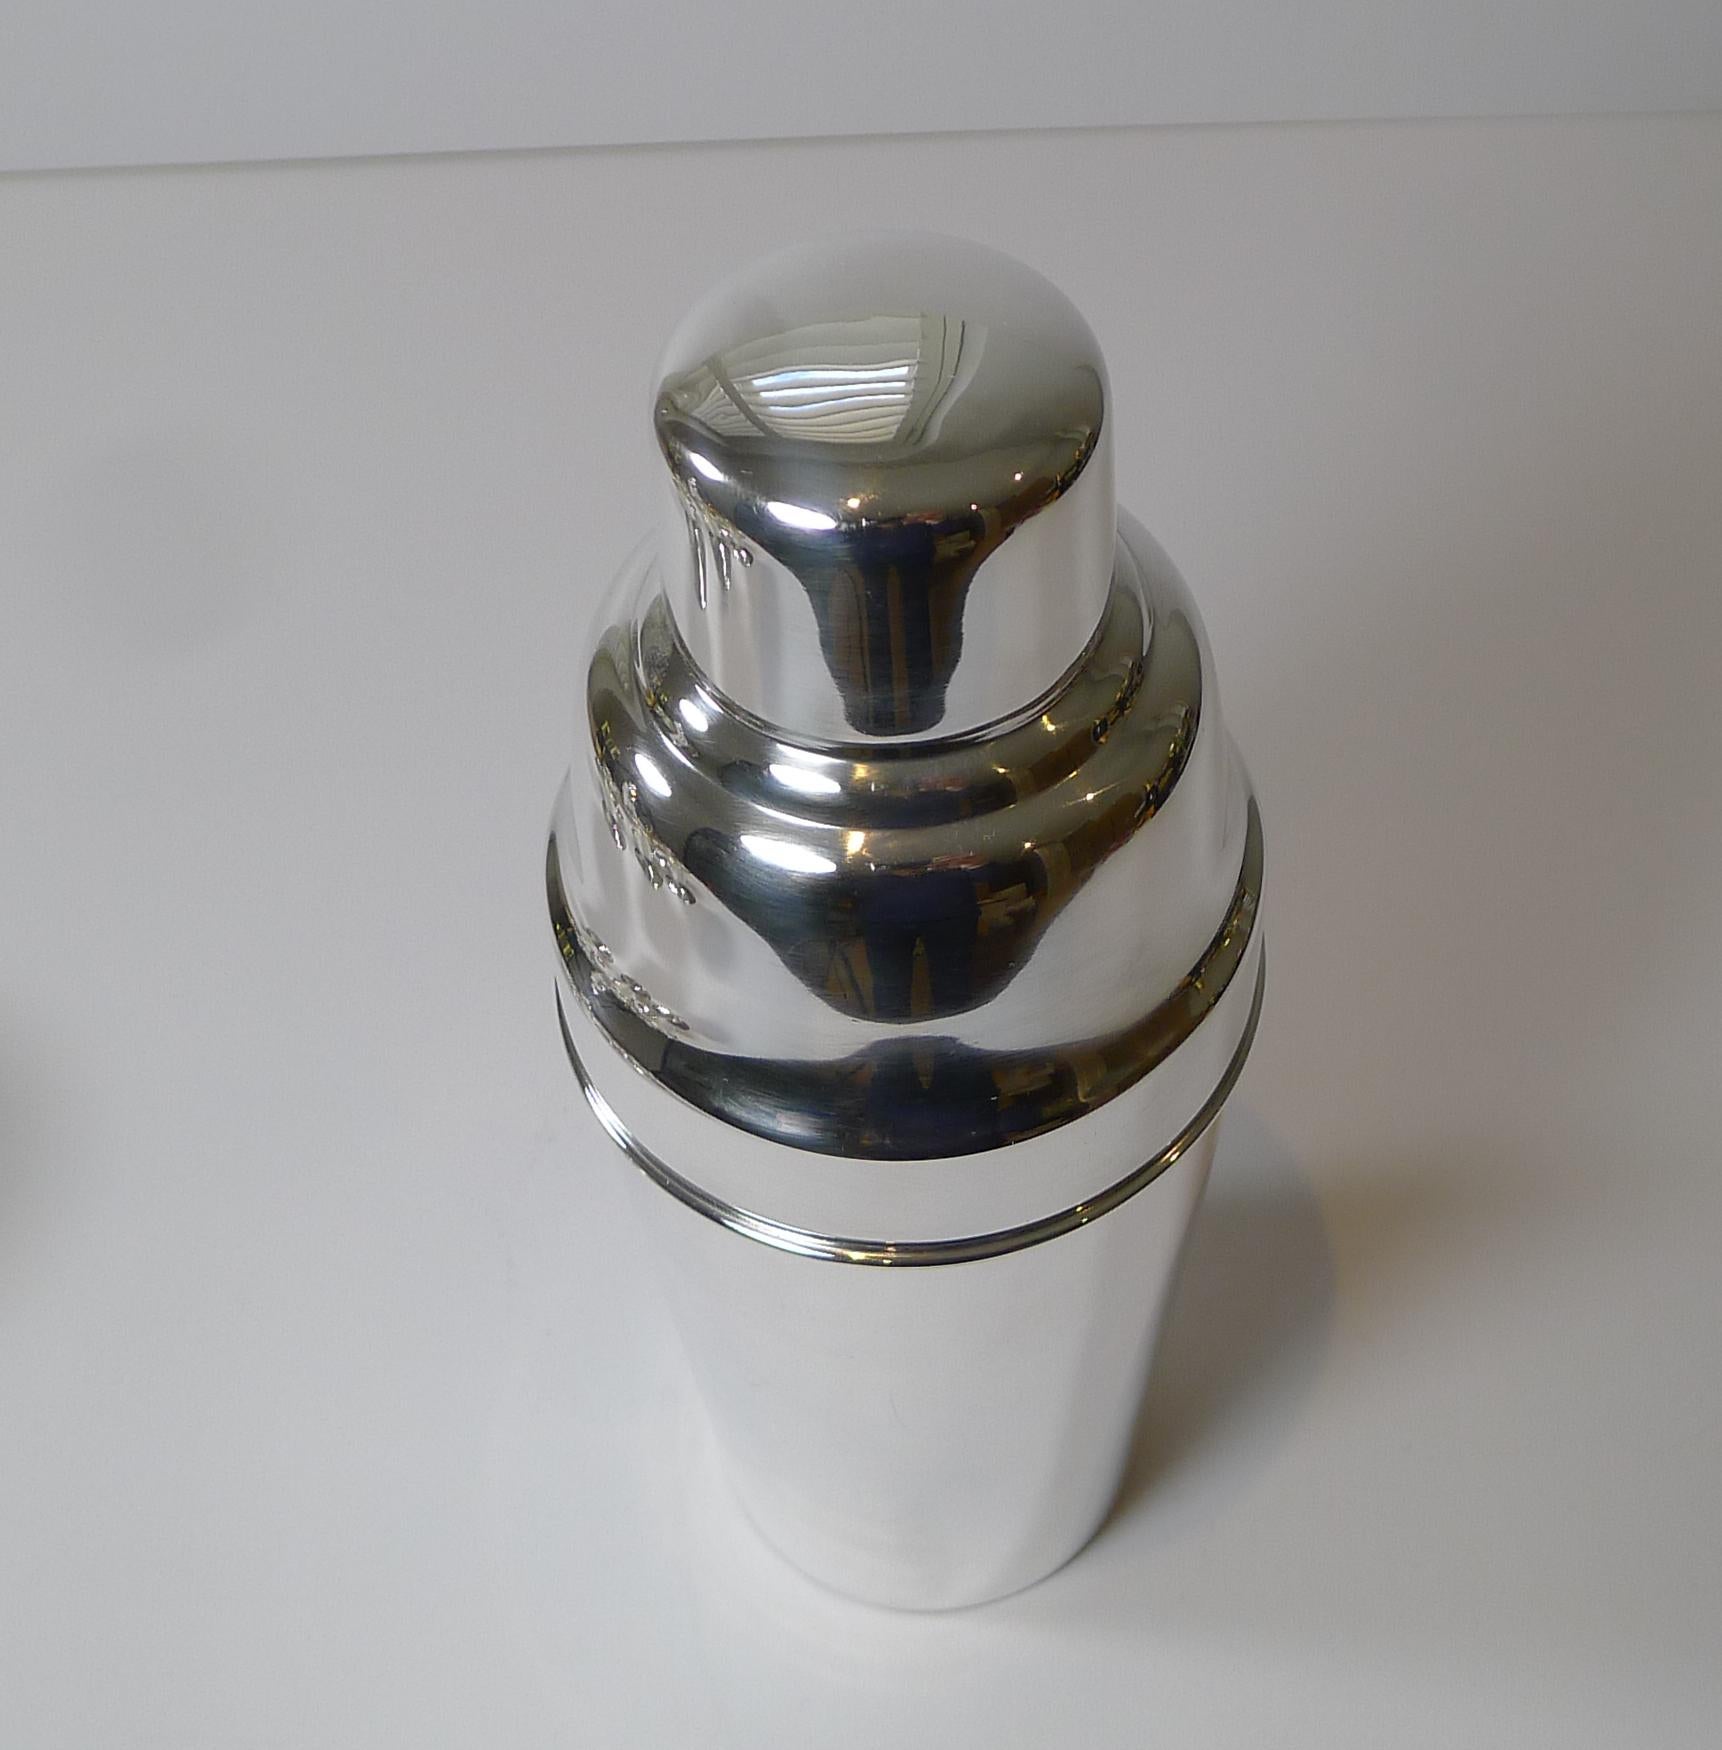 A smart, classic Art Deco cocktail shaker made by the top-notch silversmith, Mappin and Webb of London and Sheffield.

Just back from our silversmith's workshop where it has been professionally cleaned and polished, restoring it to it's former